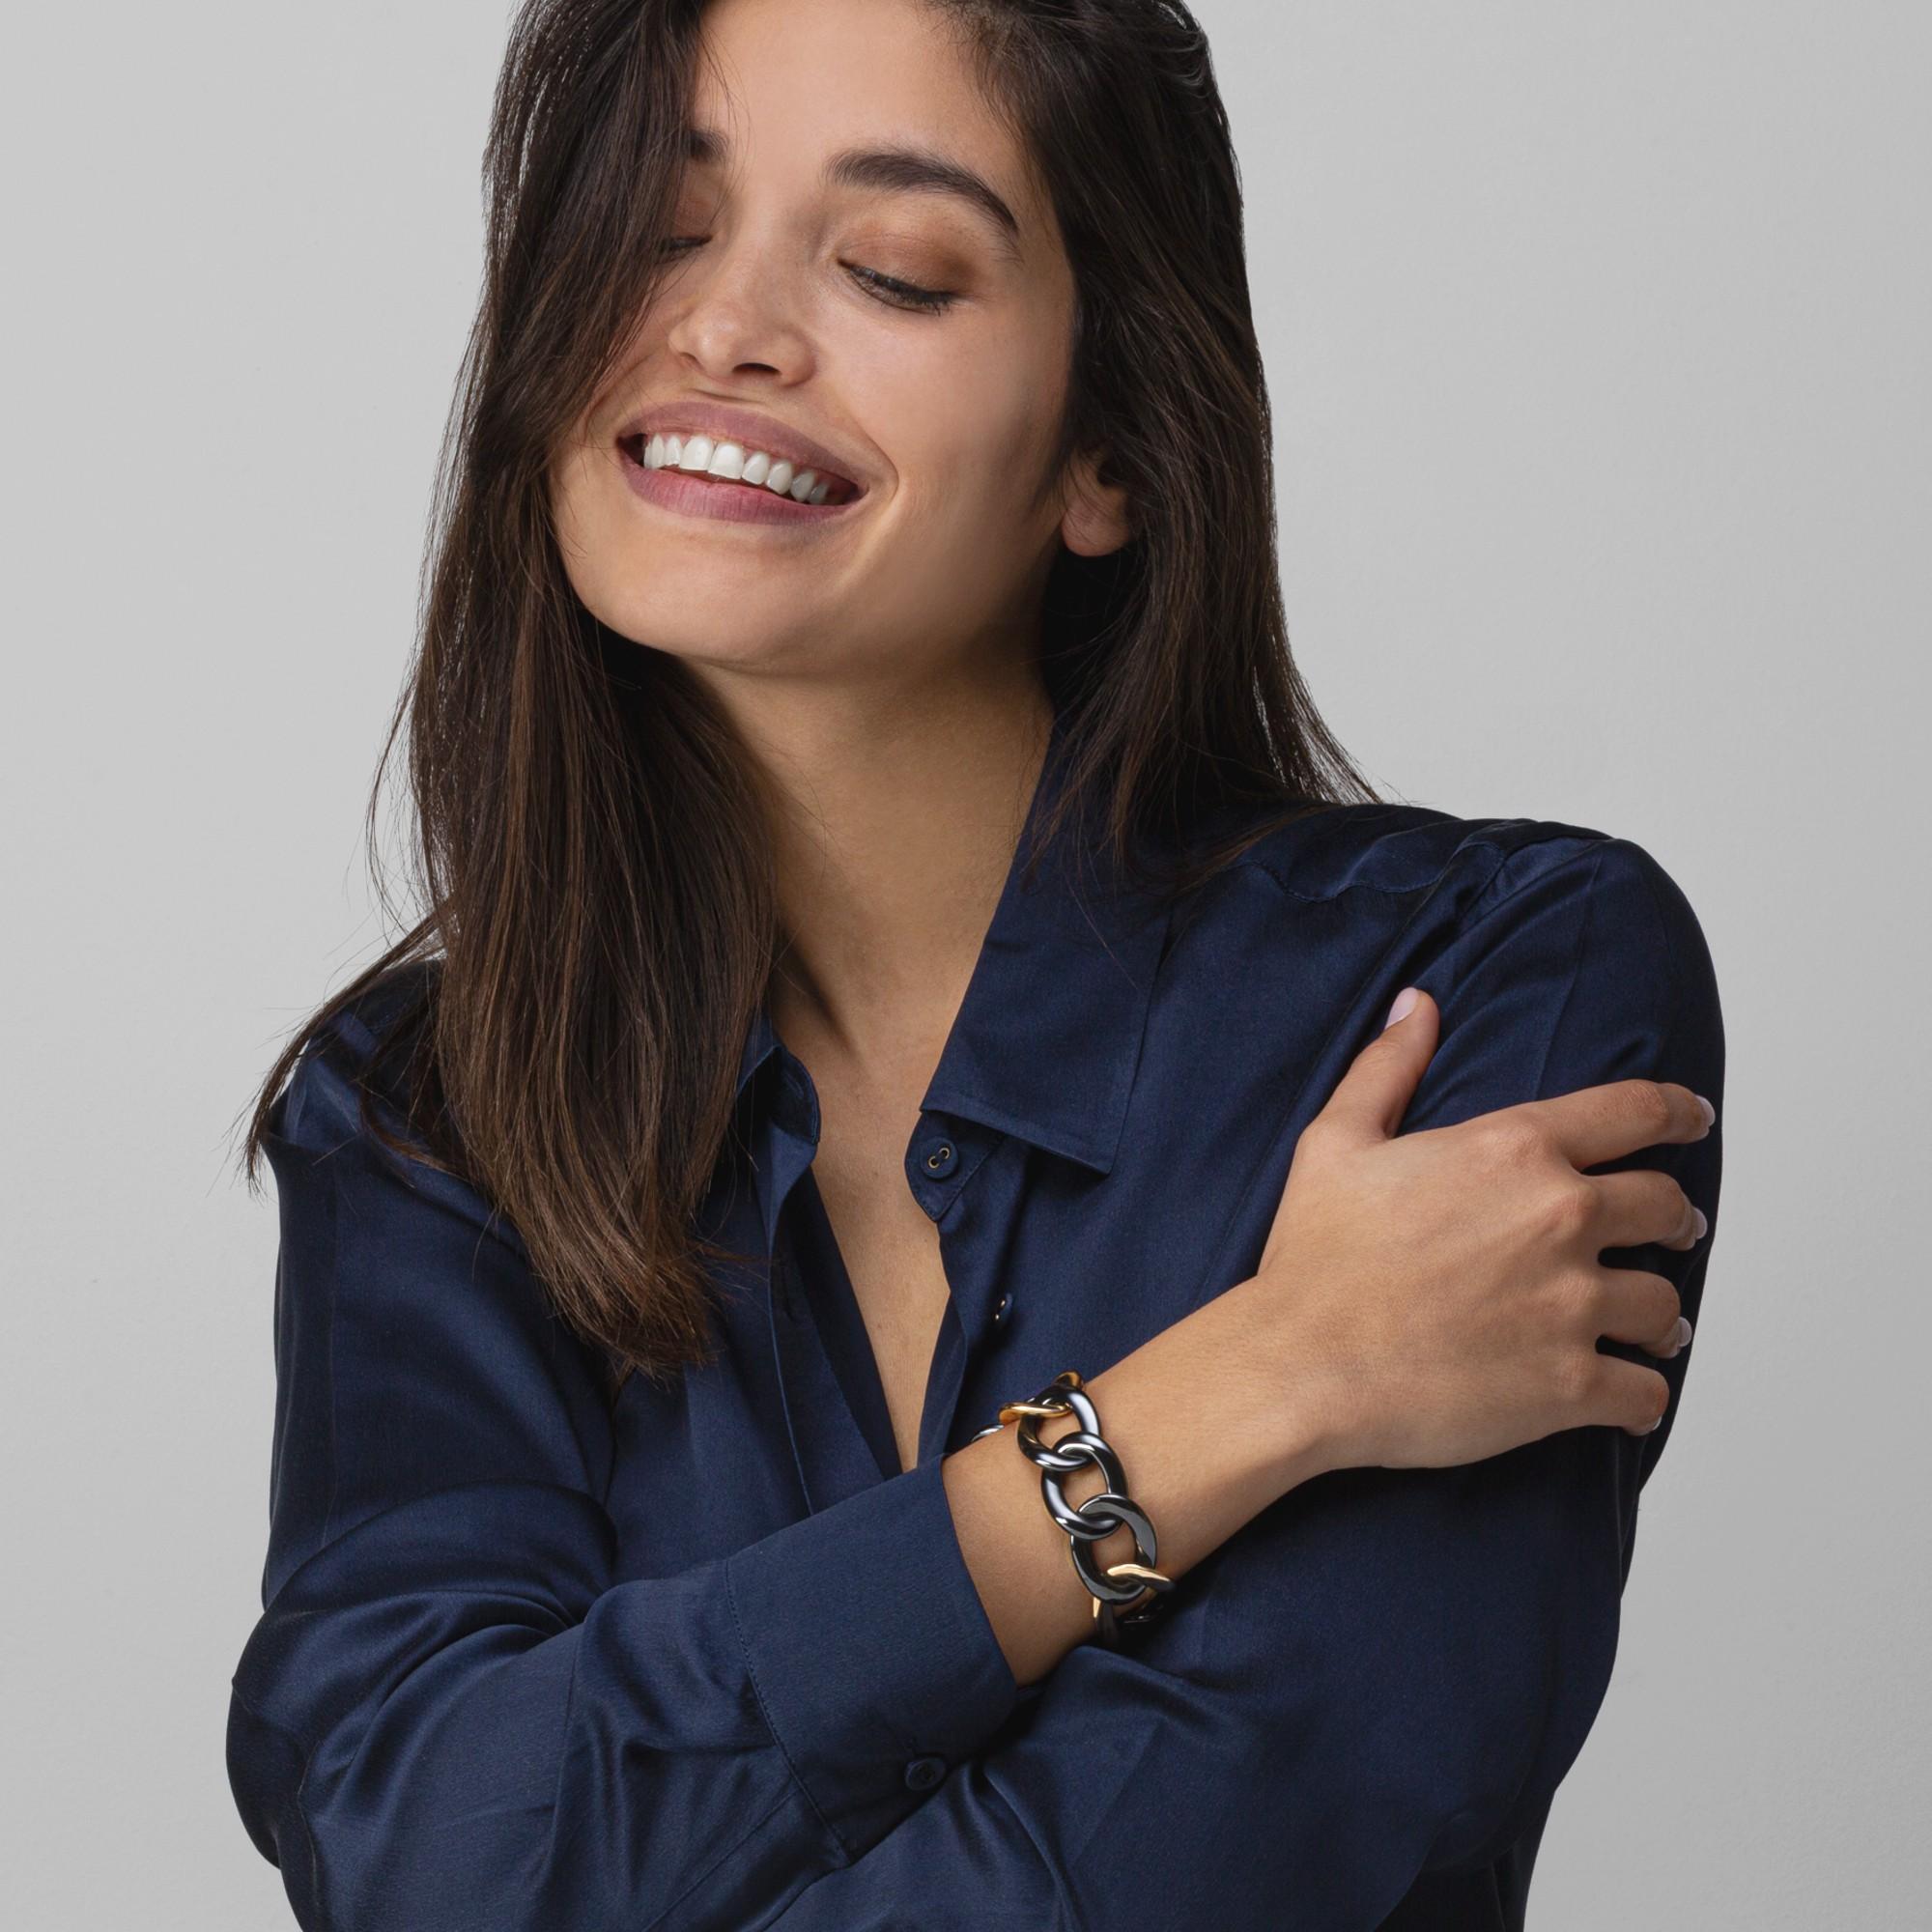 Alex Jona design collection, hand crafted in Italy, alternating 18k rose gold and black high-tech
ceramic curb-link bracelet.
With a hardness approaching that of diamond, high-tech ceramic is a highly
scratch-resistant material. Light and